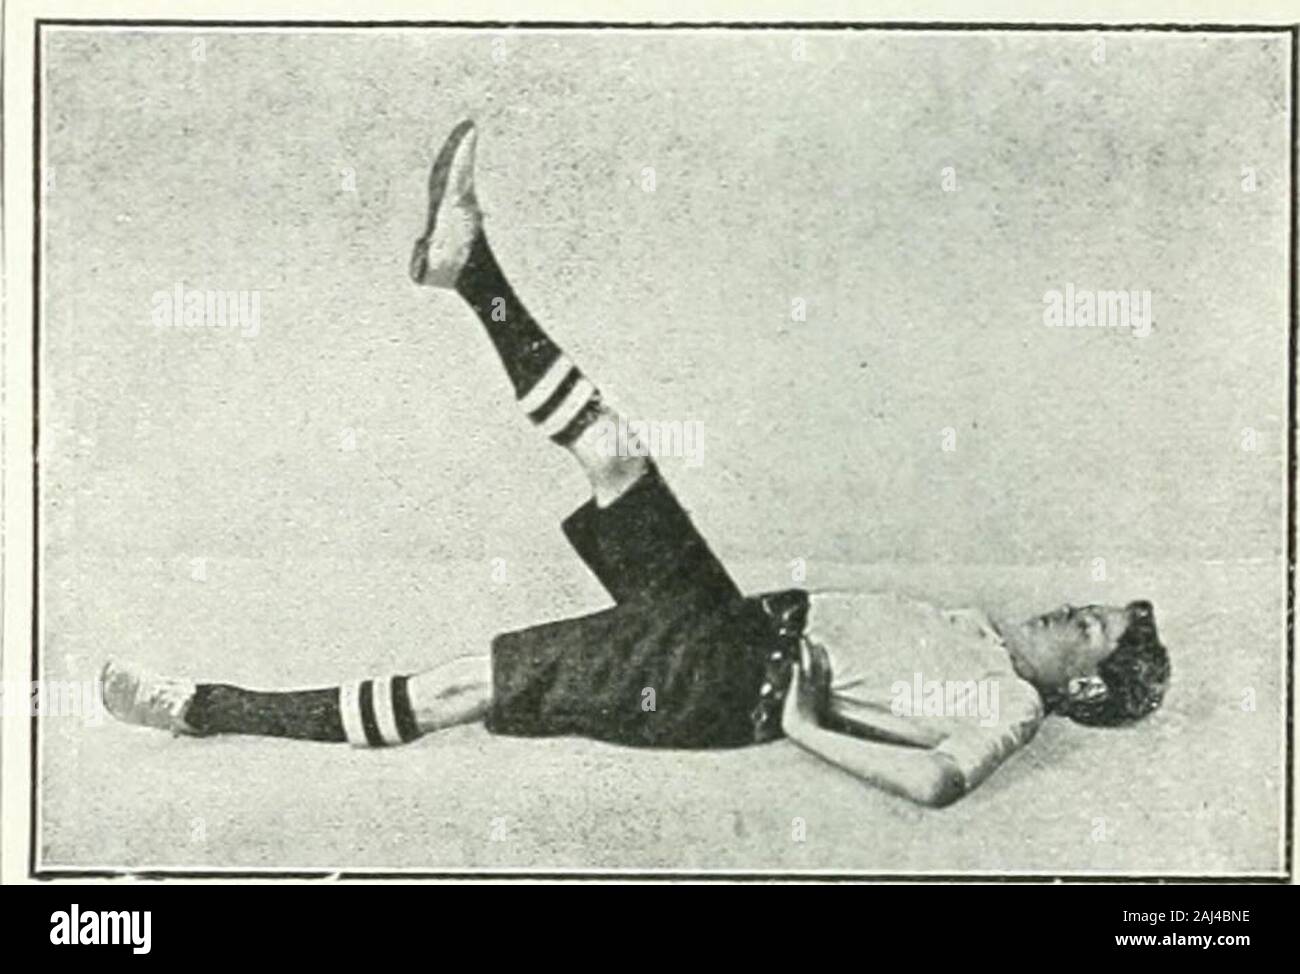 Syllabus of physical exercises for schools . ays AND downward. 4. Knee raising, leg stretching backward. (Hips firm.) 5. Arm swinging forward andsideways, with forwardlunge. (Arms forward andupward raise.) ^Alternate leg rasingA {Lying.Hips firm.)or. Trunk falling backward. {Kneeling, Arms bend.) 6. a. Trunk turning. (Left arm BEND. right hand NECKREST.) b. Trunk bending sideways.(Feet astride, arms up-ward stretch.) 7. a. Crosswise step. (Hands ON hips.)b. Skipping or jumping, or game. 8. Breathing. Arm turning out- ward AND inward. COMMANDS. c. Left (right) foot backward in lunge position—pl Stock Photo